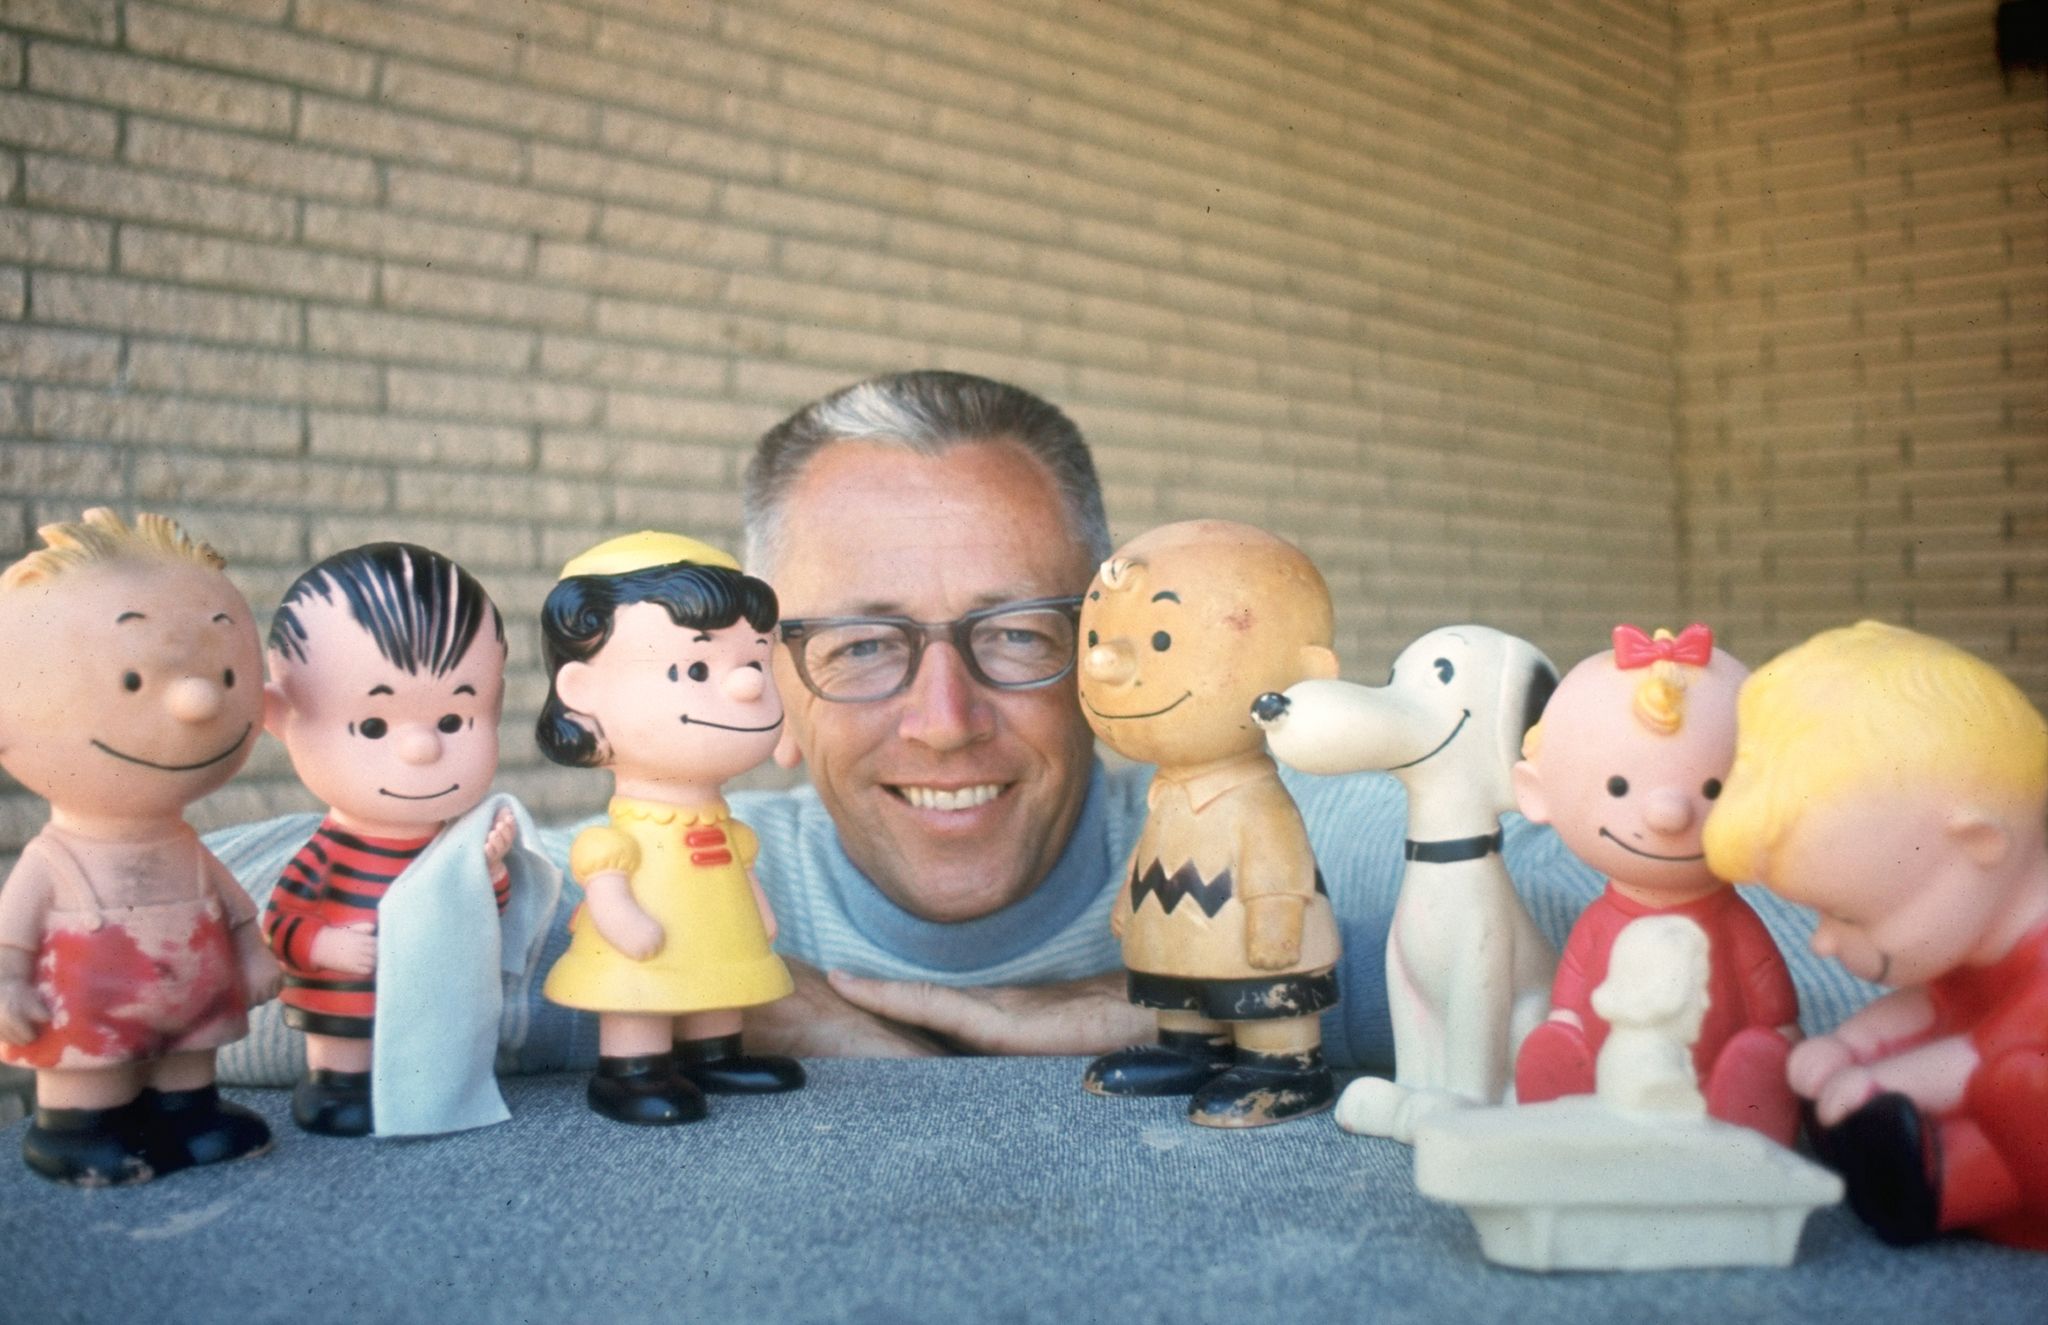 los angeles   january 1 charles m schulz with a few of his peanuts characters, including from left linus with blanket lucy van pelt, charlie brown, and snoopy image dated january 1, 1962 photo by cbs via getty images